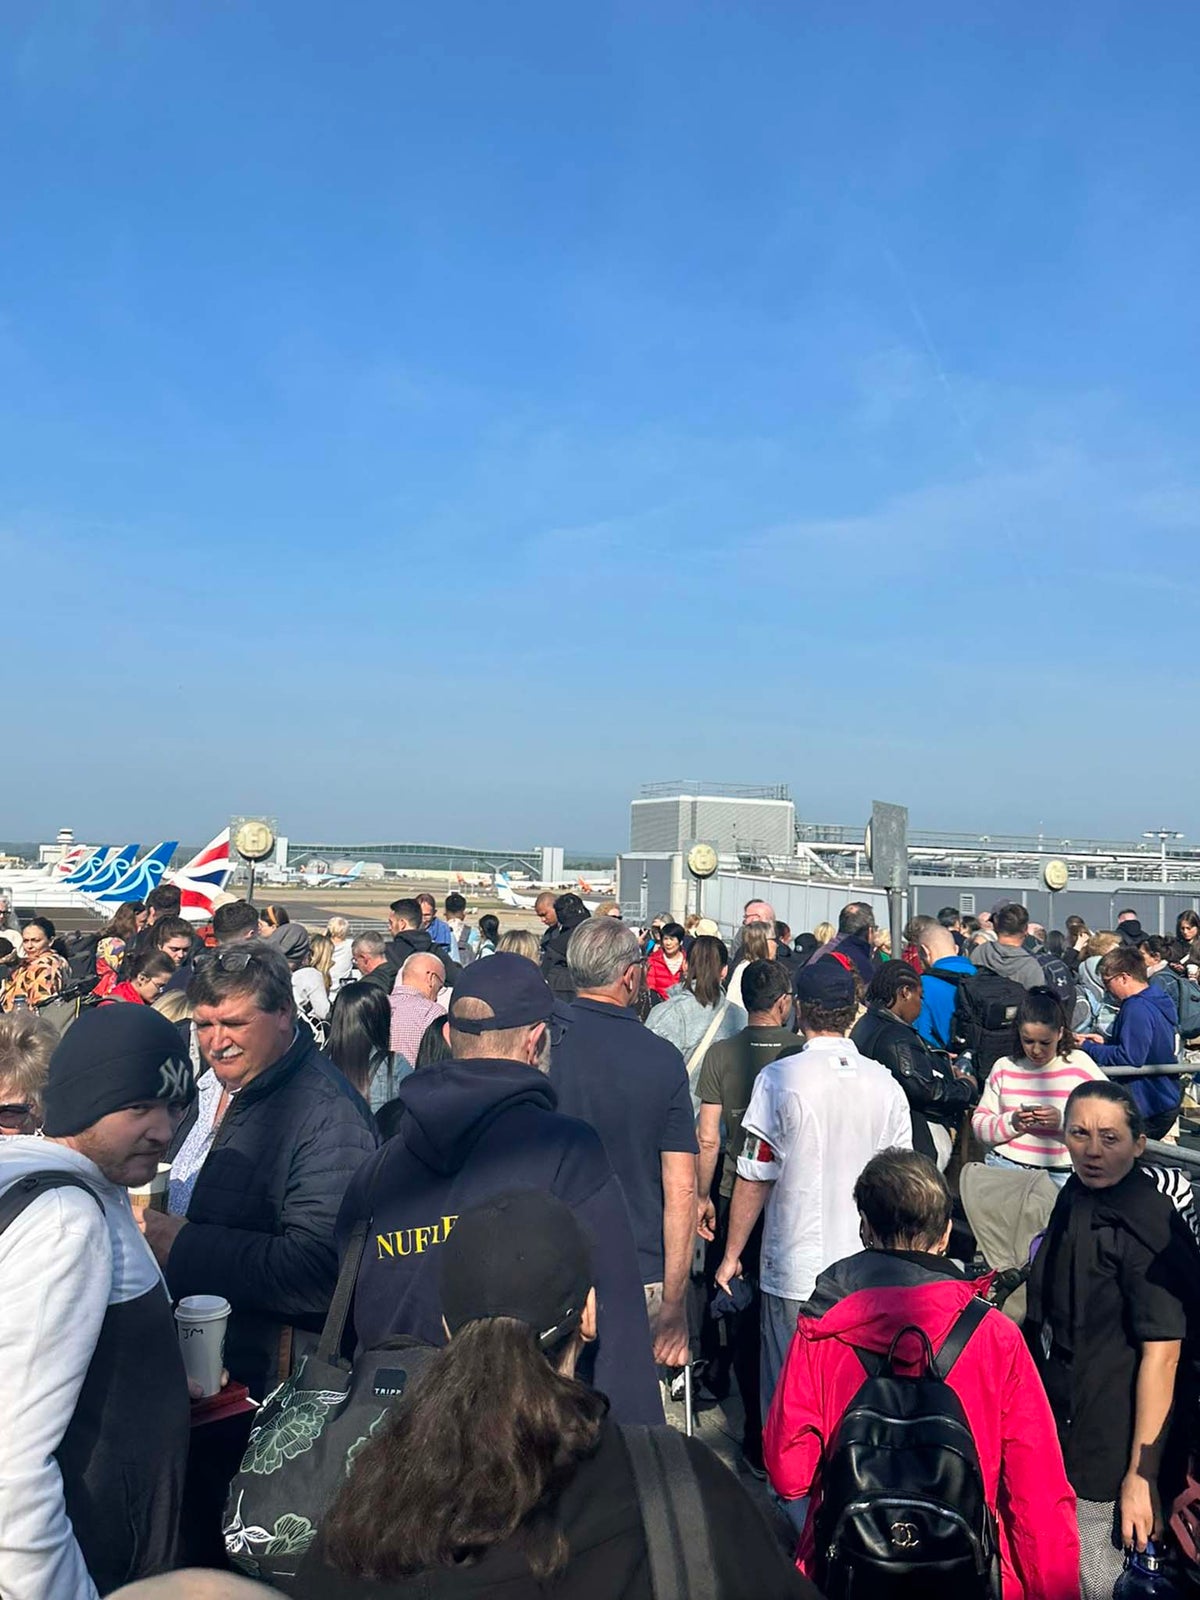 gatwick airport terminal evacuated as passengers report missing flights amid 'absolute carnage'